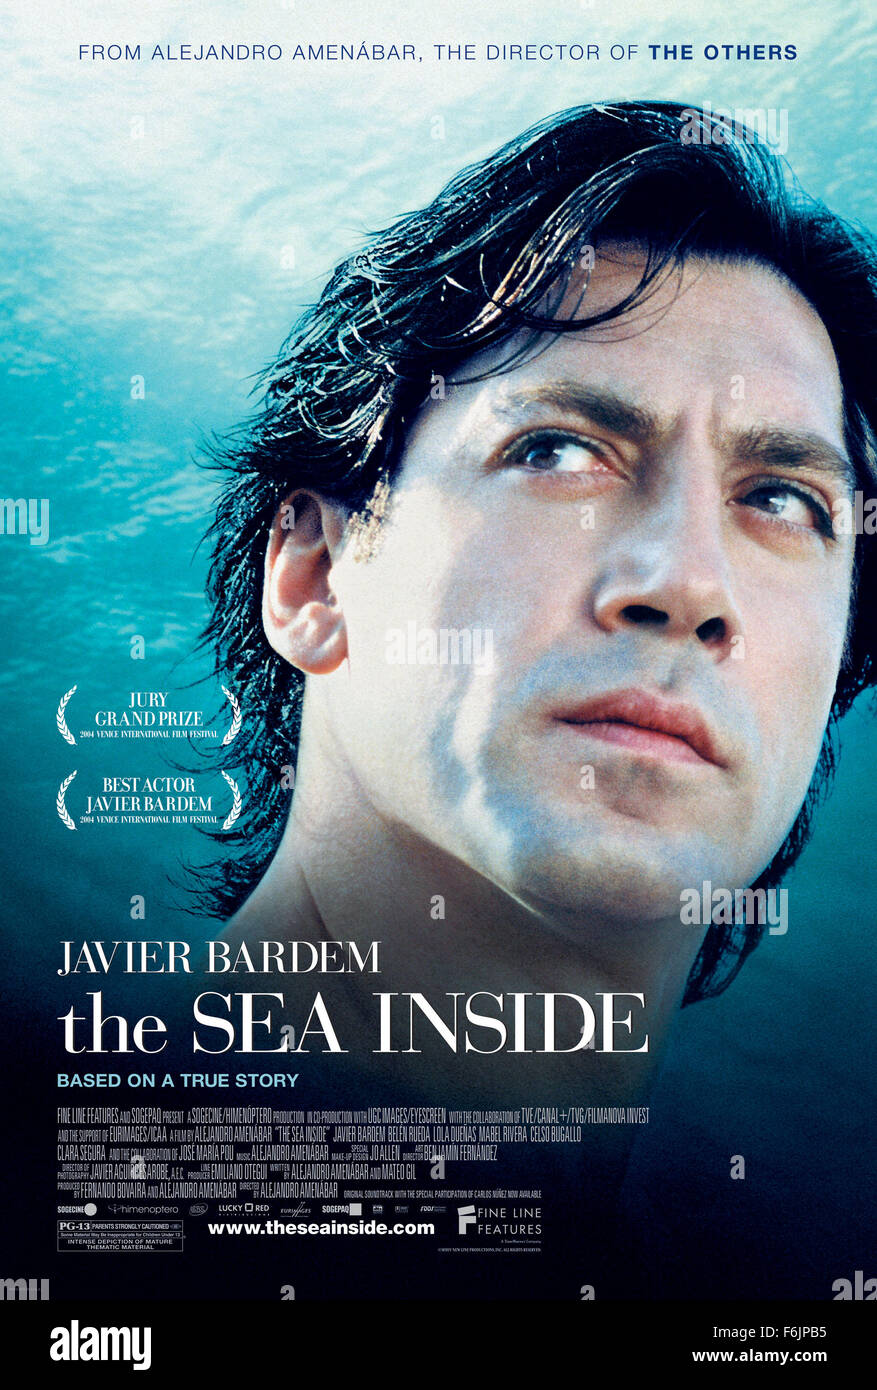 RELEASE DATE: November 14, 2004. MOVIE TITLE: The Sea Inside. STUDIO: Sogepaq. PLOT: The real-life story of Spaniard Ramon Sampedro, who fought a 30 year campaign in favor of euthanasia and his own right to die. PICTURED: JAVIER BARDEM stars as Ramon. Stock Photo